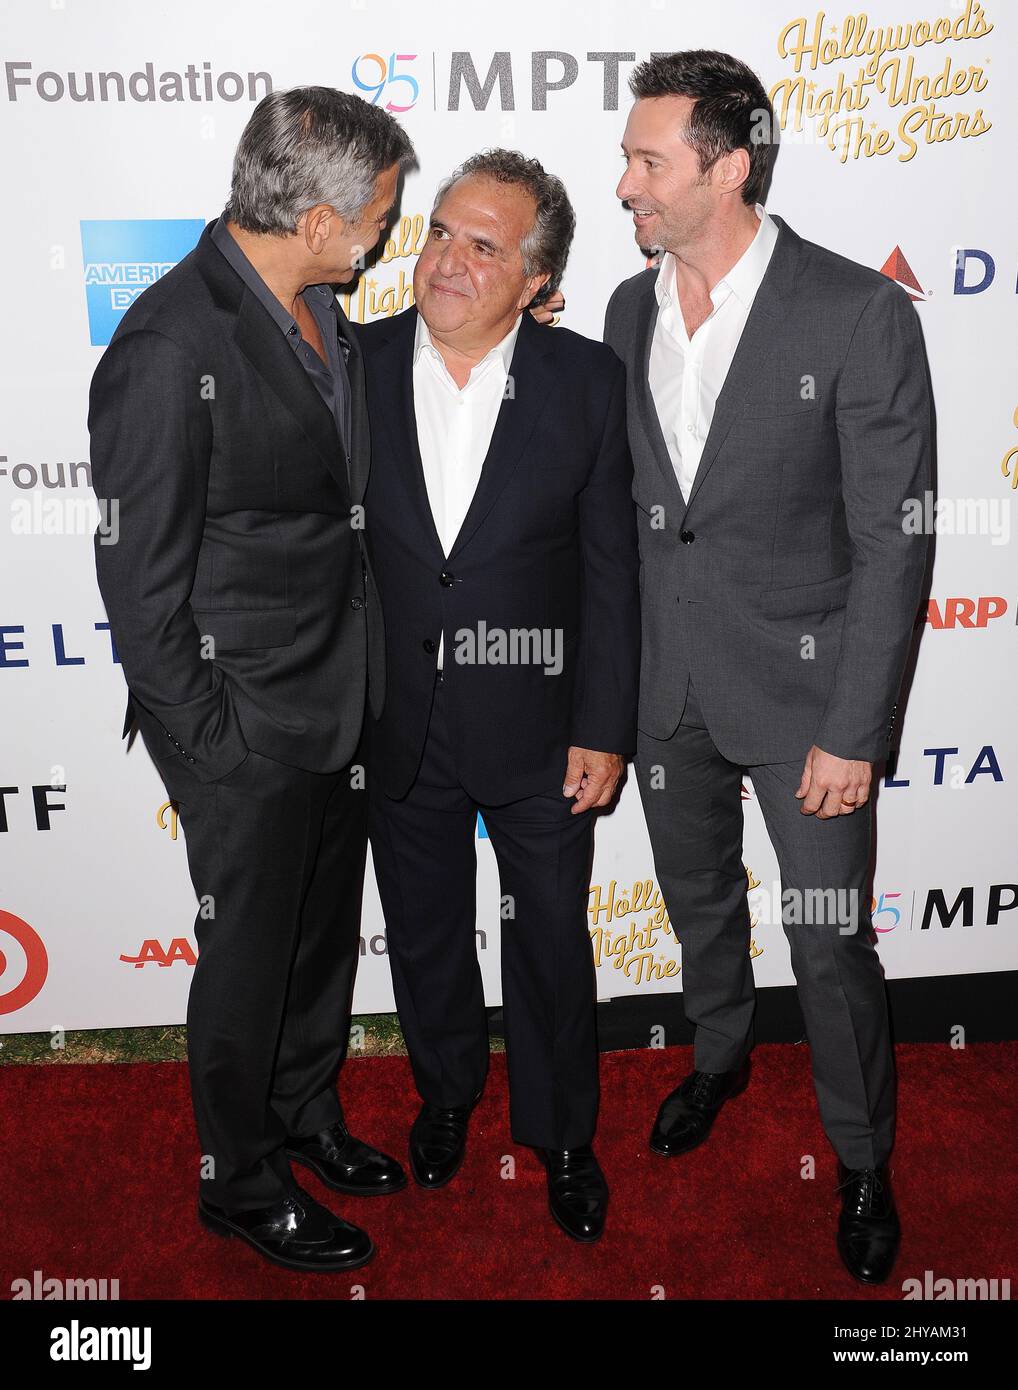 George Clooney, Jim Gianopulos, Hugh Jackman attending the 'Hollywood's Night Under The Stars' 95th Anniversary Celebration held at MPTF Wasserman Campus in Los Angeles, USA. Stock Photo